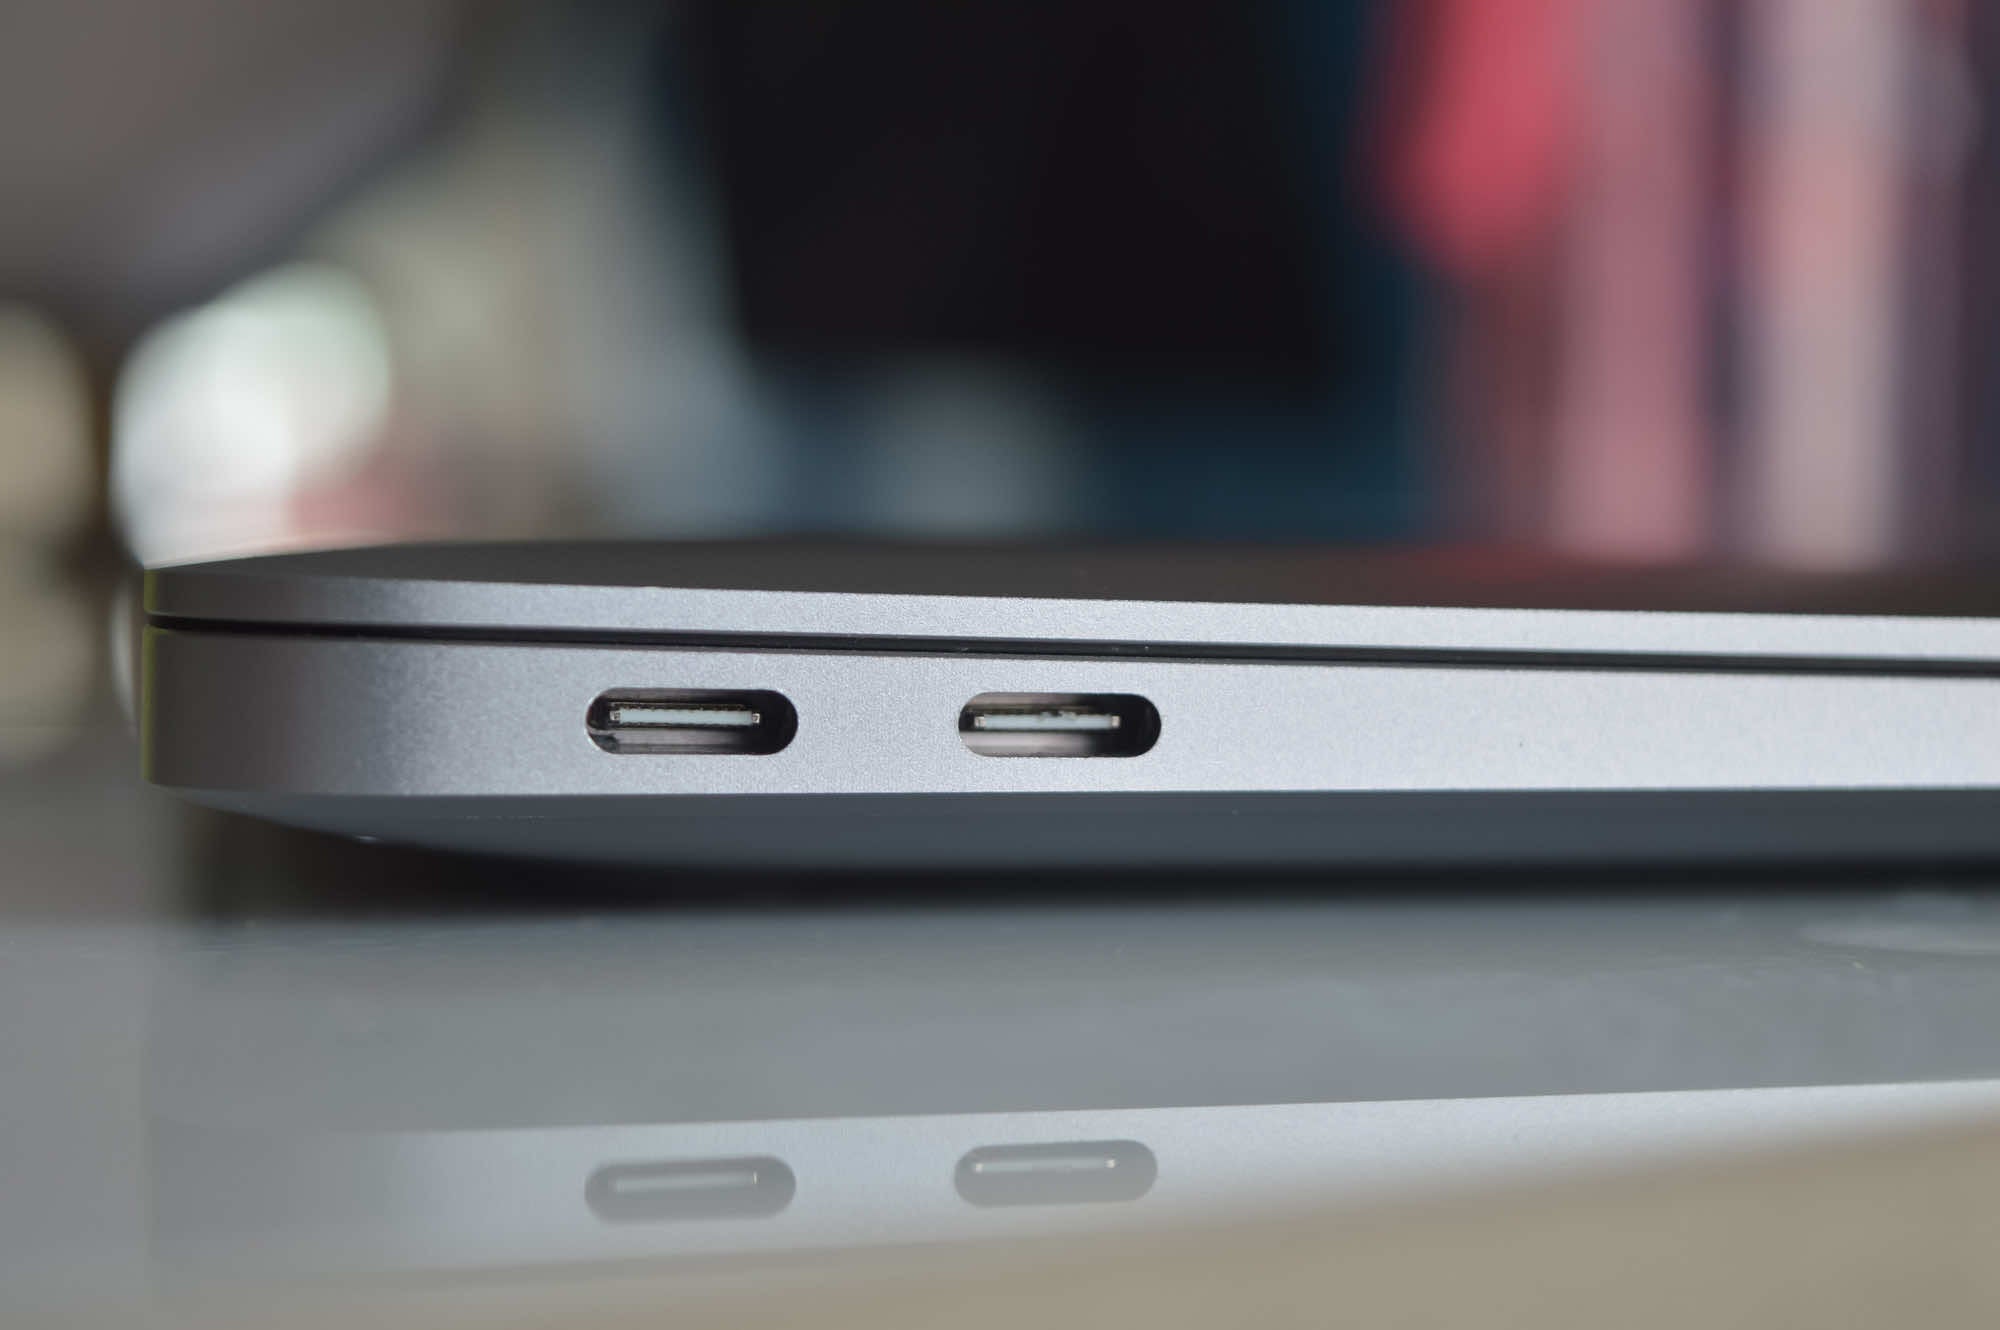 Does USB C Charge Faster? Guide About USB-C Charging Speeds - Anker US